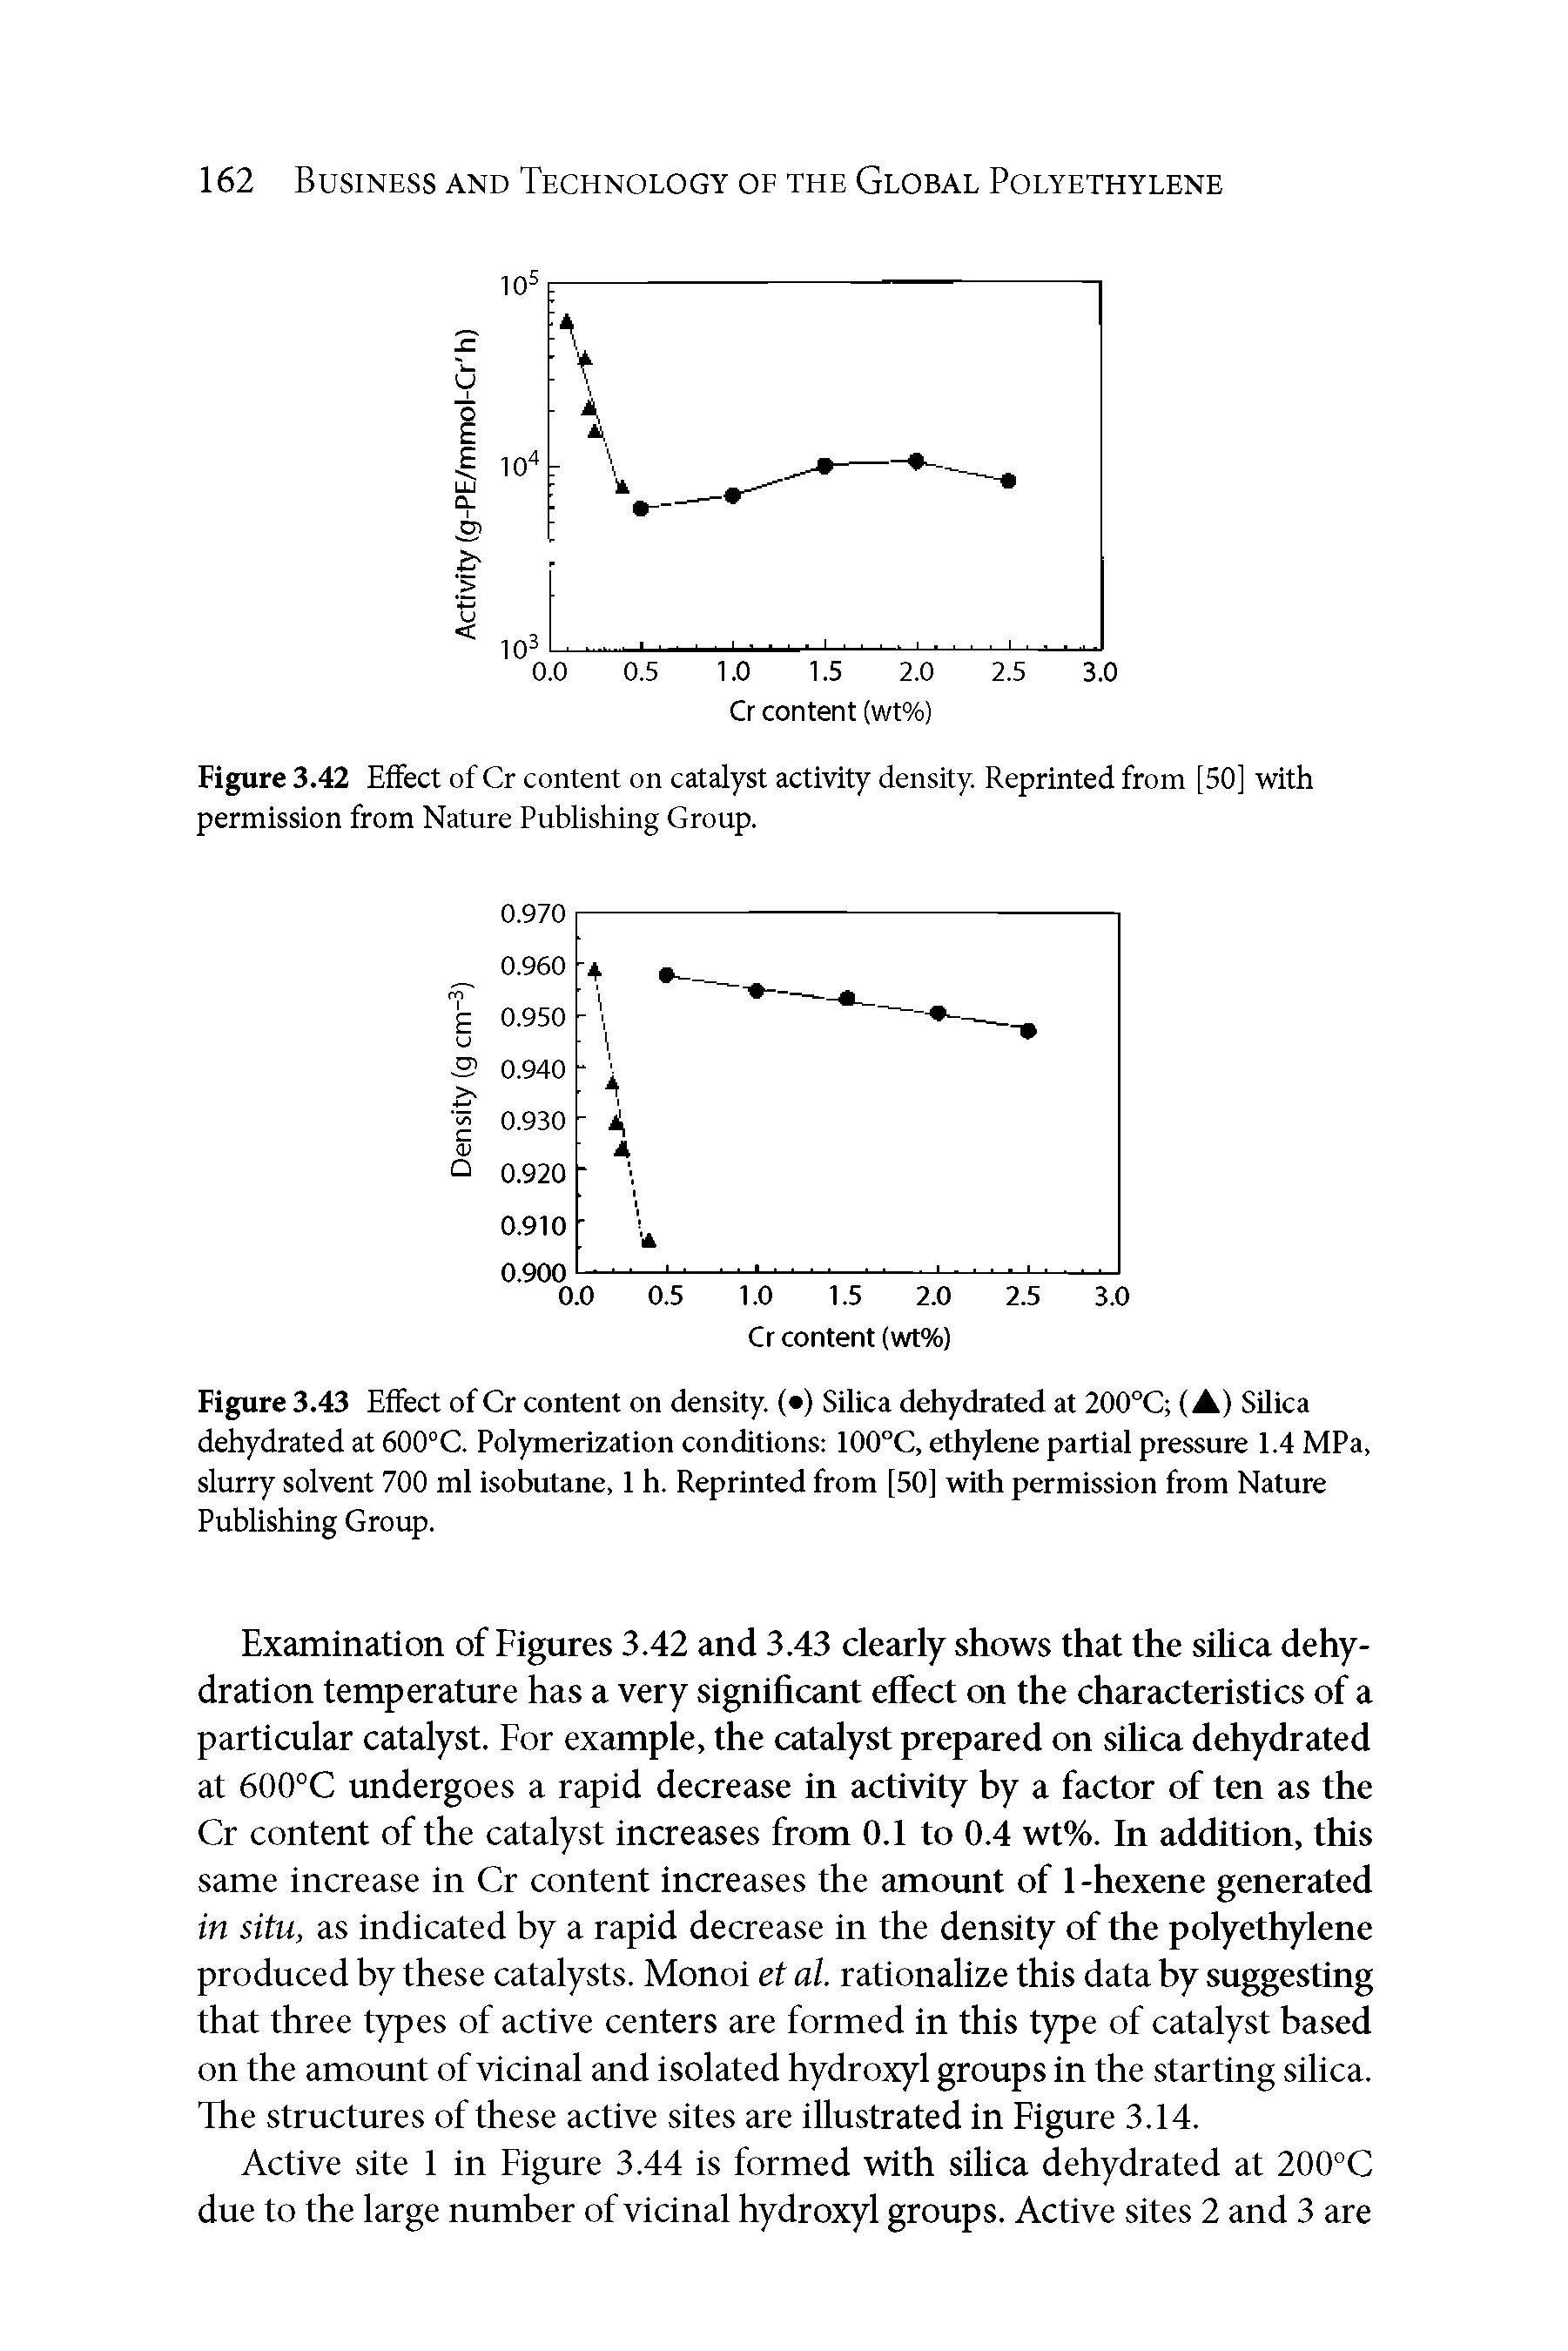 Figure 3.42 Effect of Cr content on catalyst activity density. Reprinted from [50] with permission from Nature Publishing Group.